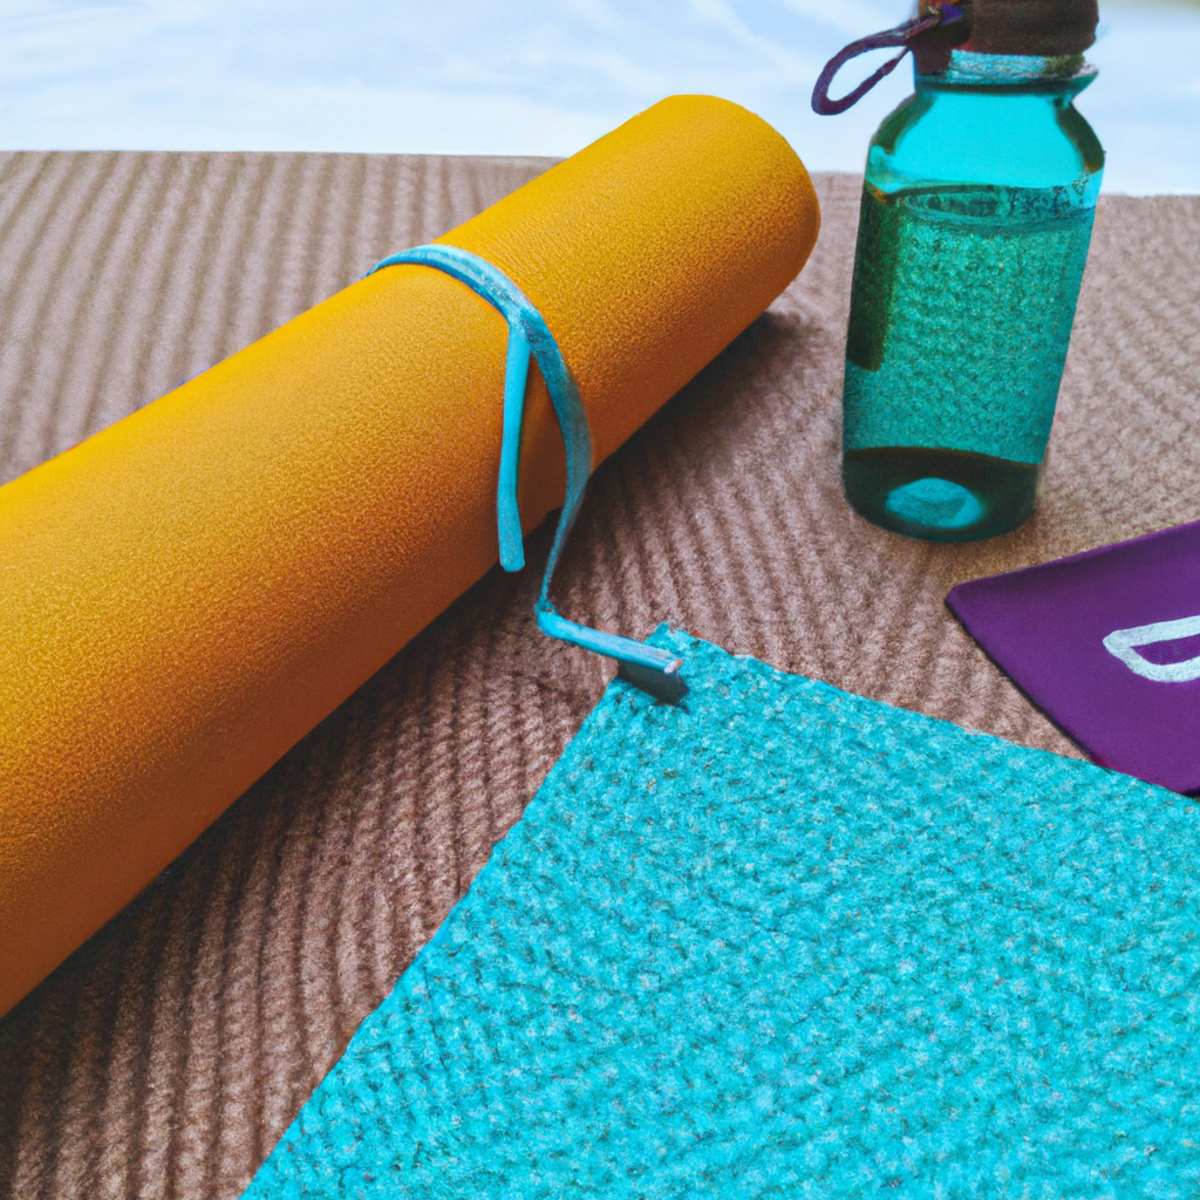 The photo captures a serene scene of a yoga mat with various objects placed on it. In the center of the mat, there is a yoga block and a strap, which are commonly used to assist with poses. To the left, there is a water bottle and a towel, indicating the importance of staying hydrated and comfortable during practice. On the right, there is a Pilates ring, which is a popular prop used to add resistance and challenge to exercises. The background is blurred, creating a sense of focus on the objects and their purpose in enhancing the practice of yoga and Pilates for a stronger body and mind.